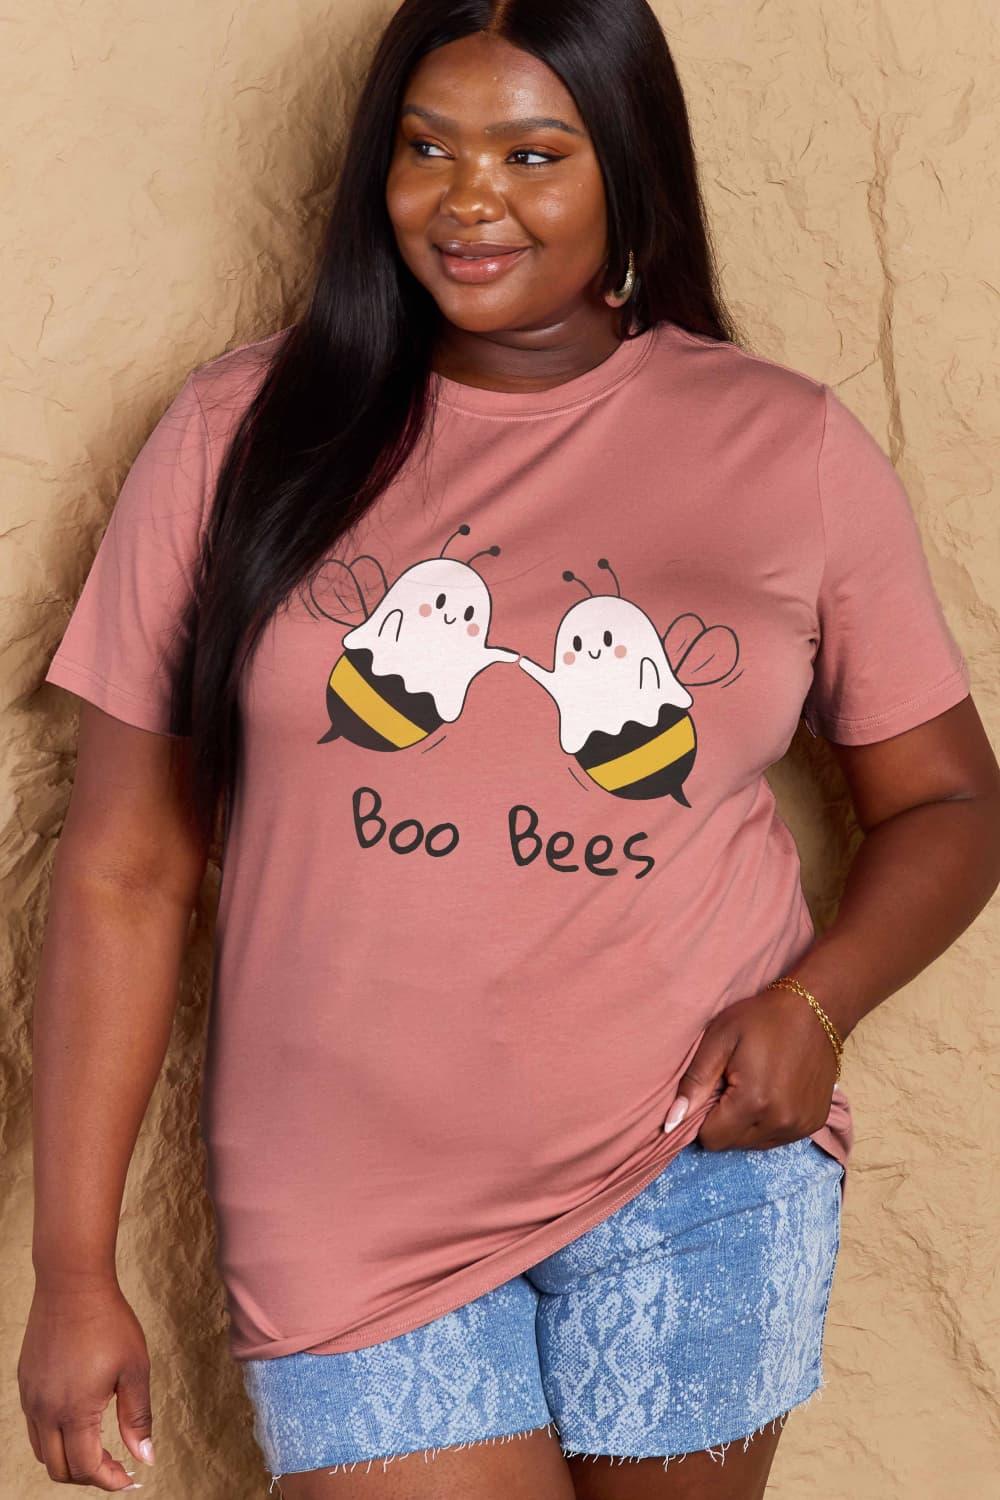 Simply Love Full Size BOO BEES Graphic Cotton T-Shirt - Vesteeto